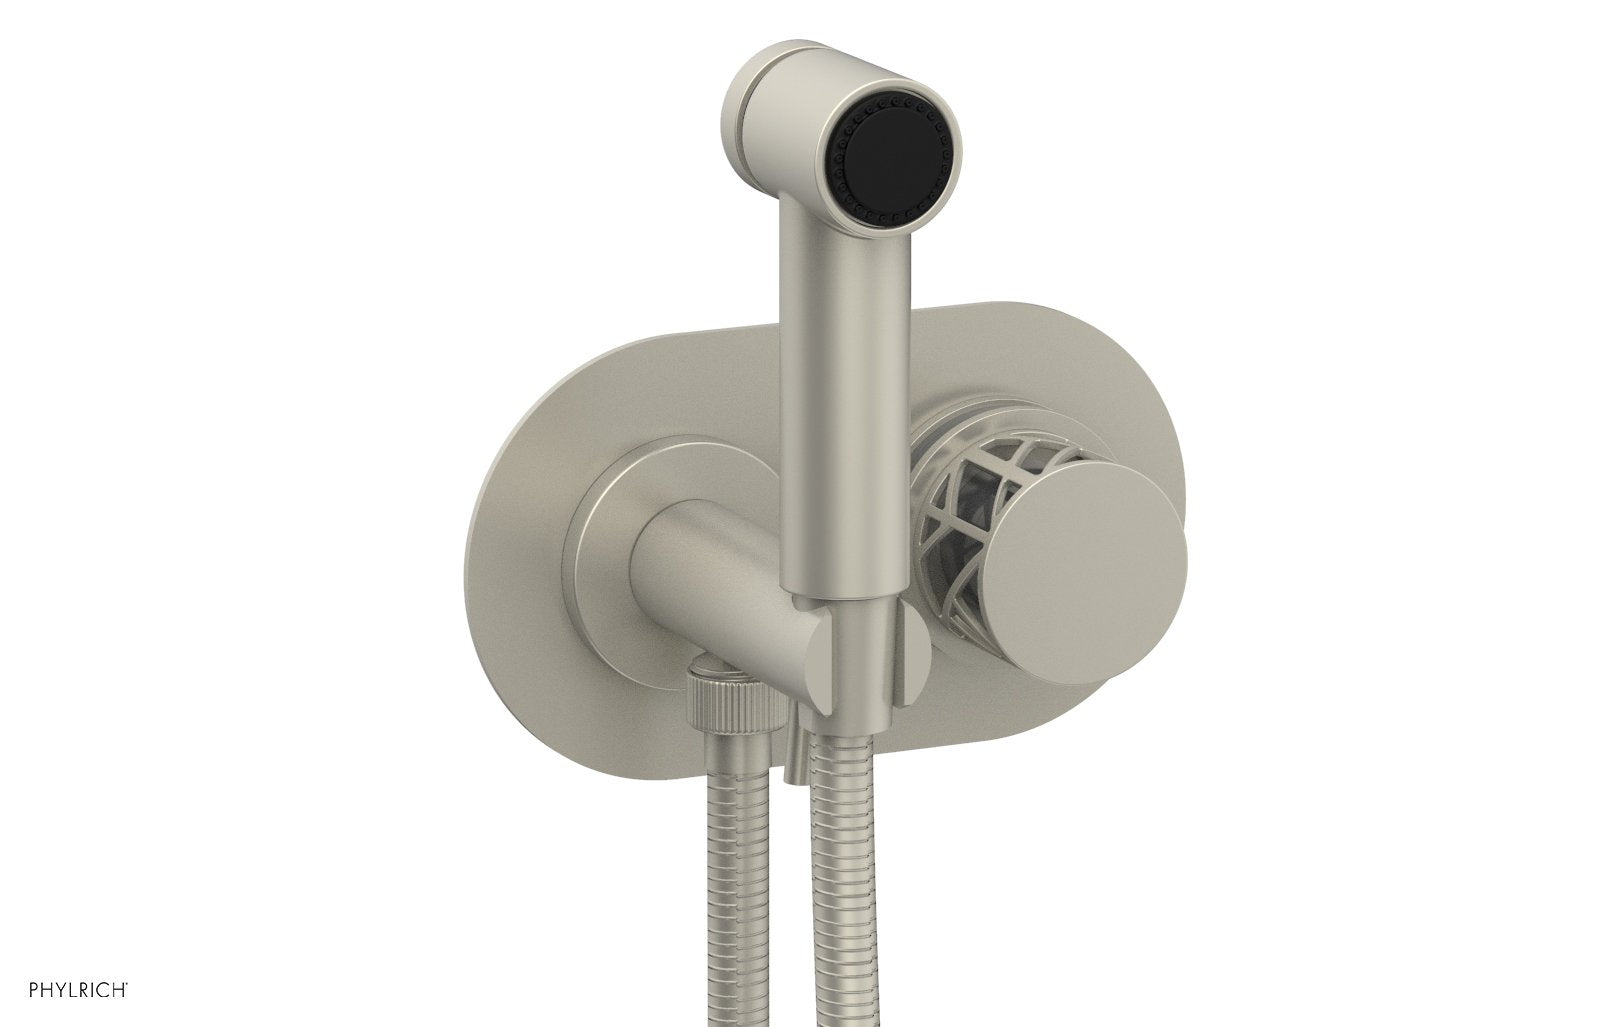 Phylrich JOLIE Wall Mounted Bidet, Round Handle with "Grey" Accents